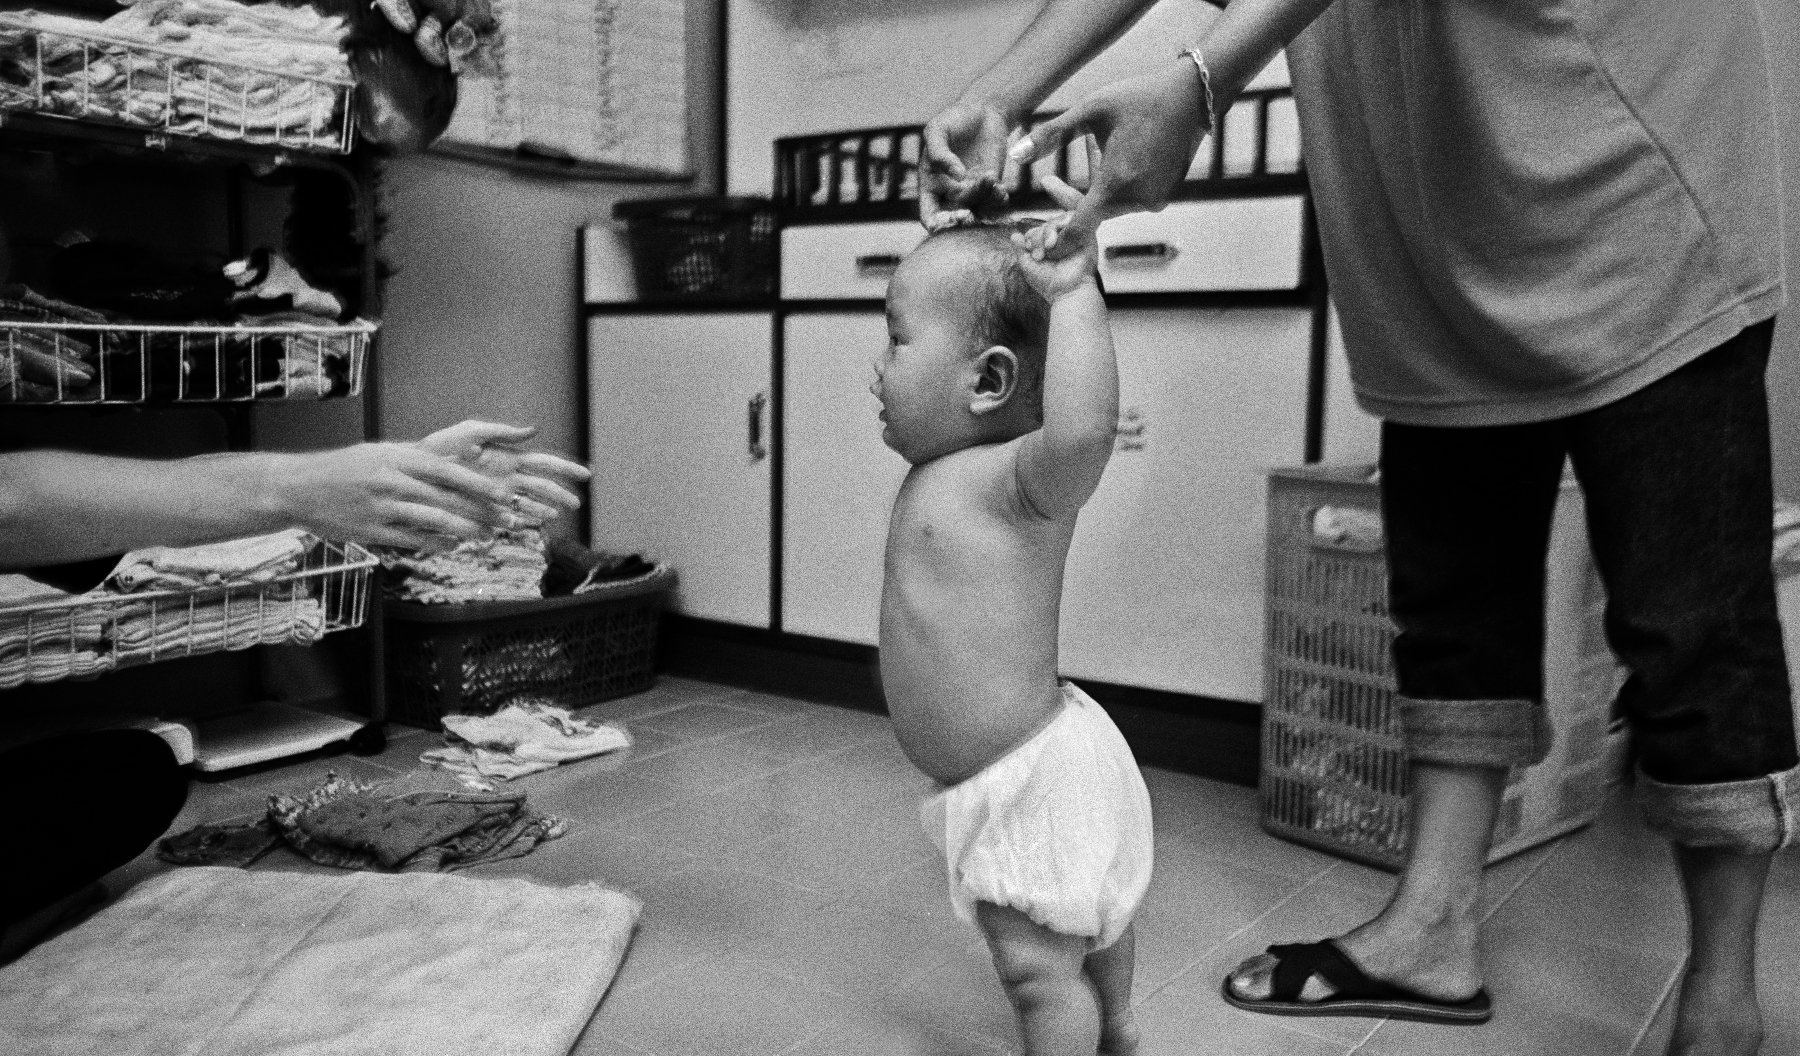  "First Steps" At the Agape orphanage for those living with HIV. Chiang Mai, Thailand. The mid-1990s. 